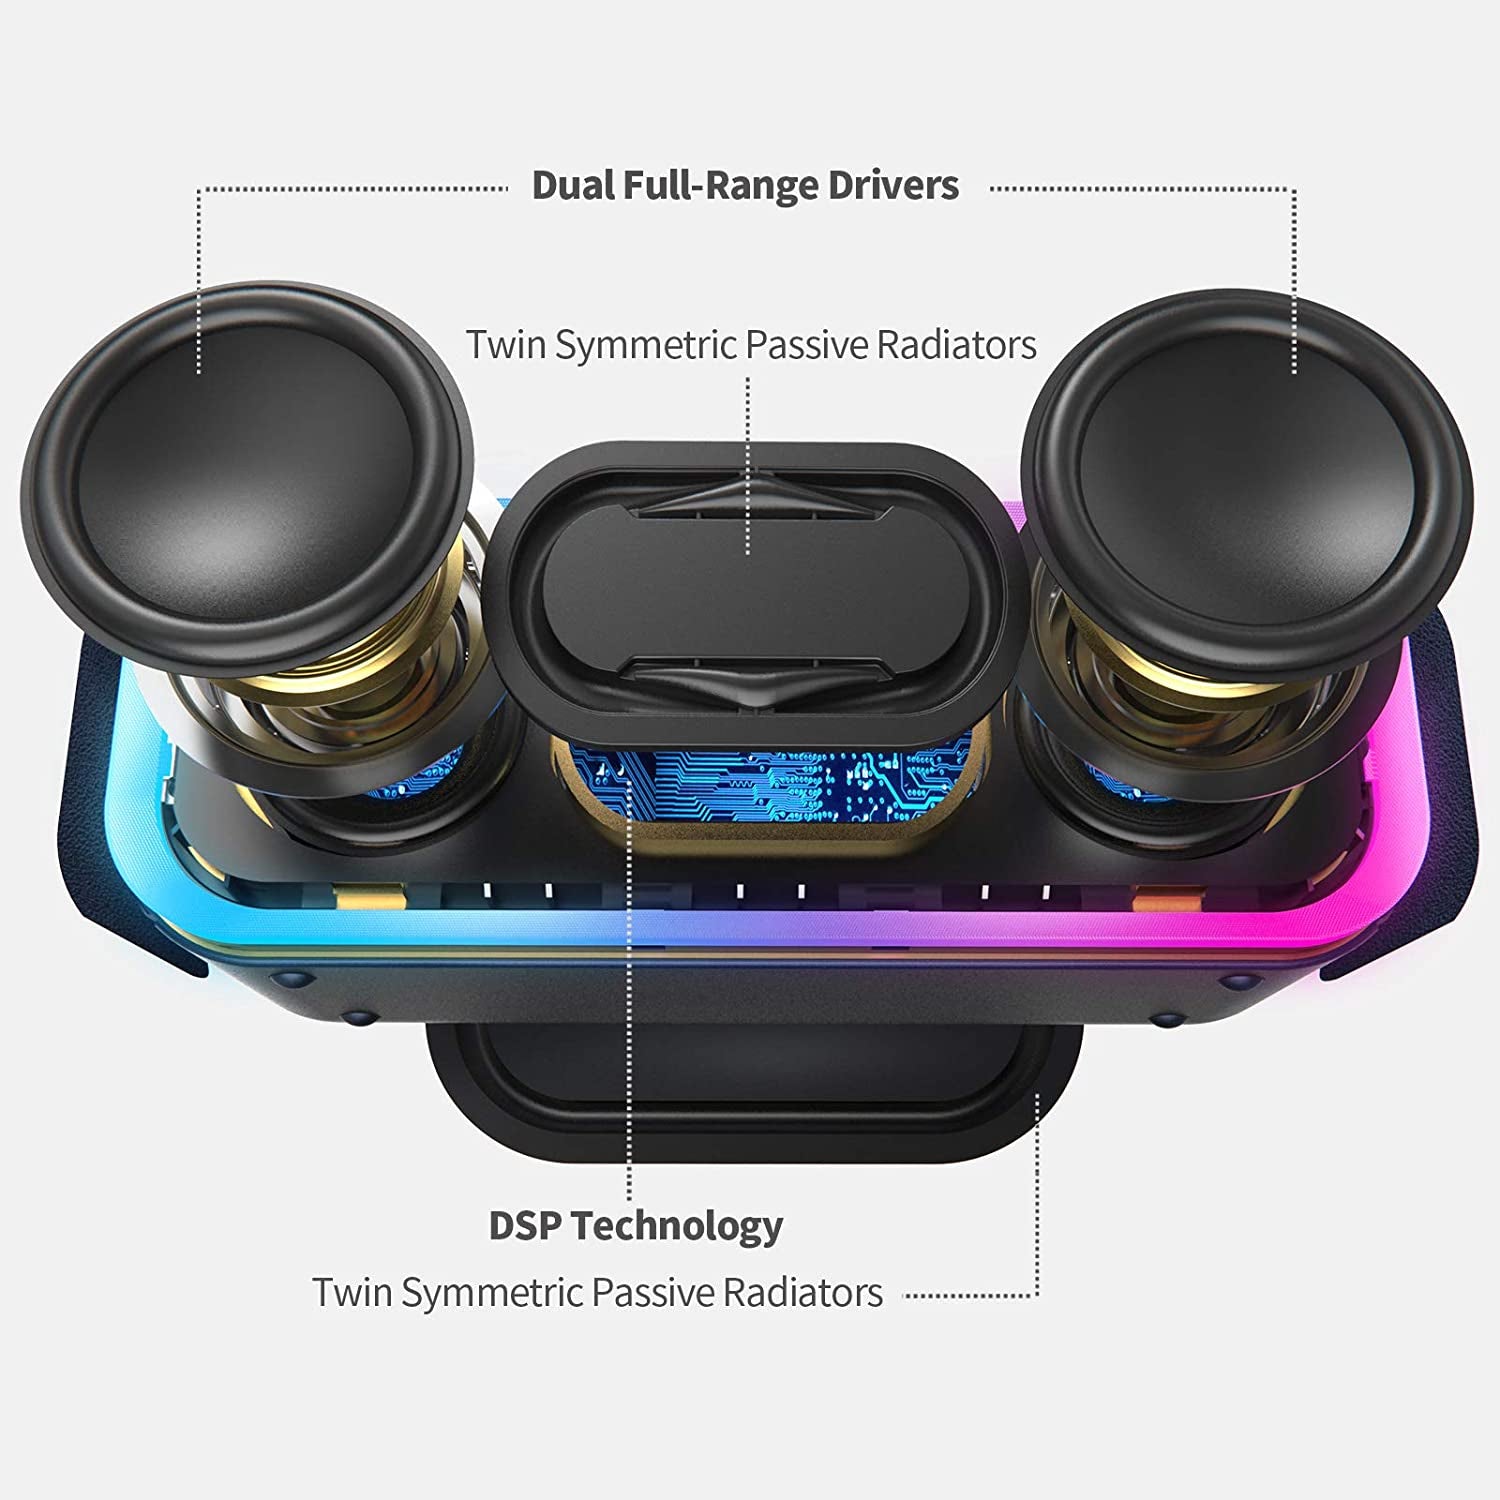 Bluetooth Speaker,  Soundbox Pro+ Wireless Pairing Speaker with 24W Stereo Sound, Punchy Bass, IPX6 Waterproof, 15Hrs Playtime, Multi-Colors Lights, for Home,Outdoor-Black